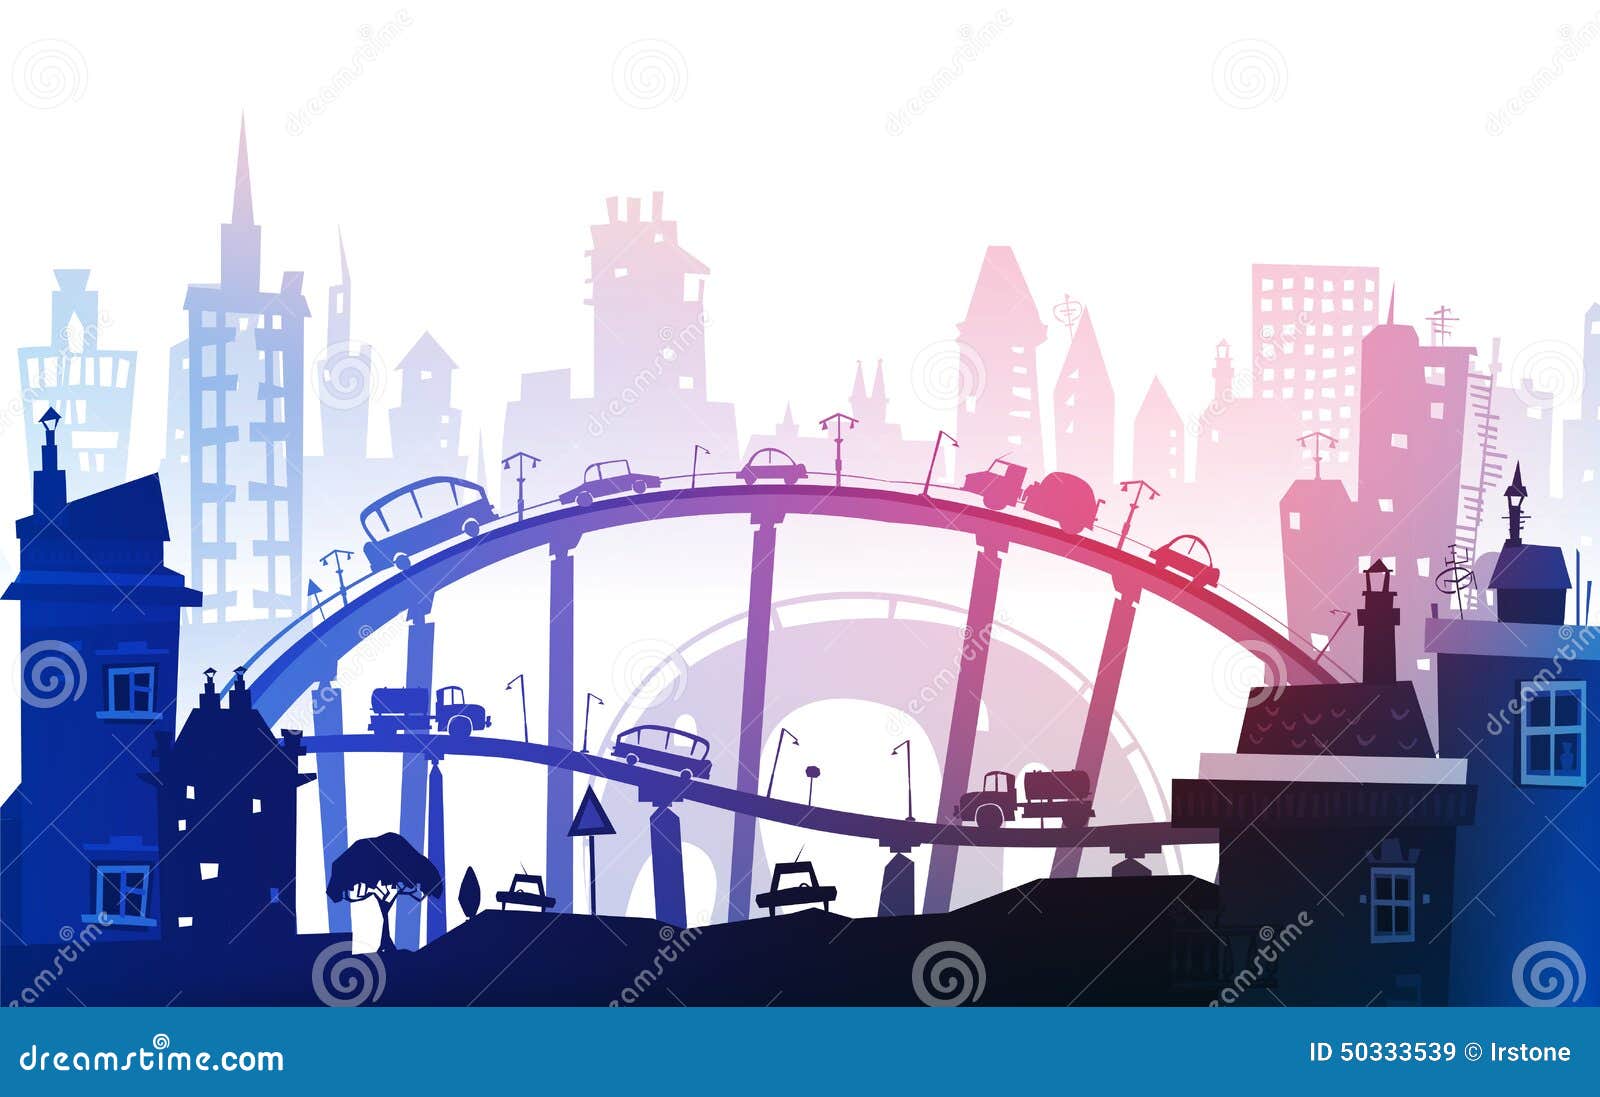 city background with roads, bridges and cars